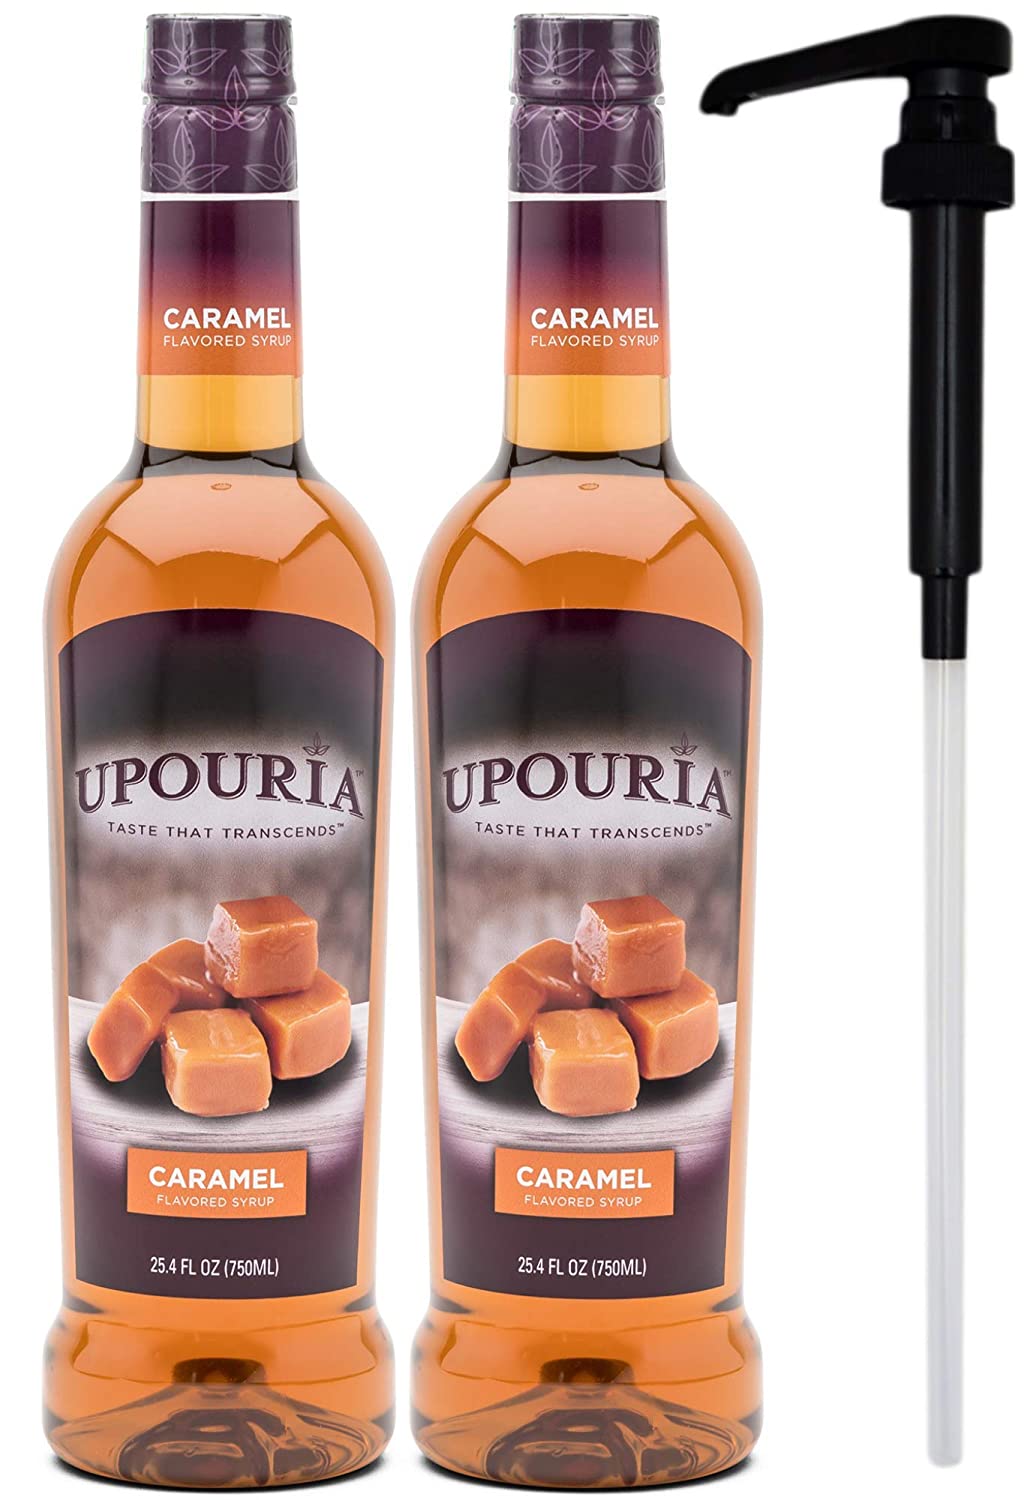 Upouria Caramel Coffee Syrup Flavoring, 100% Vegan, Gluten-Free, 750ml bottle (Pack of 2) with Pump